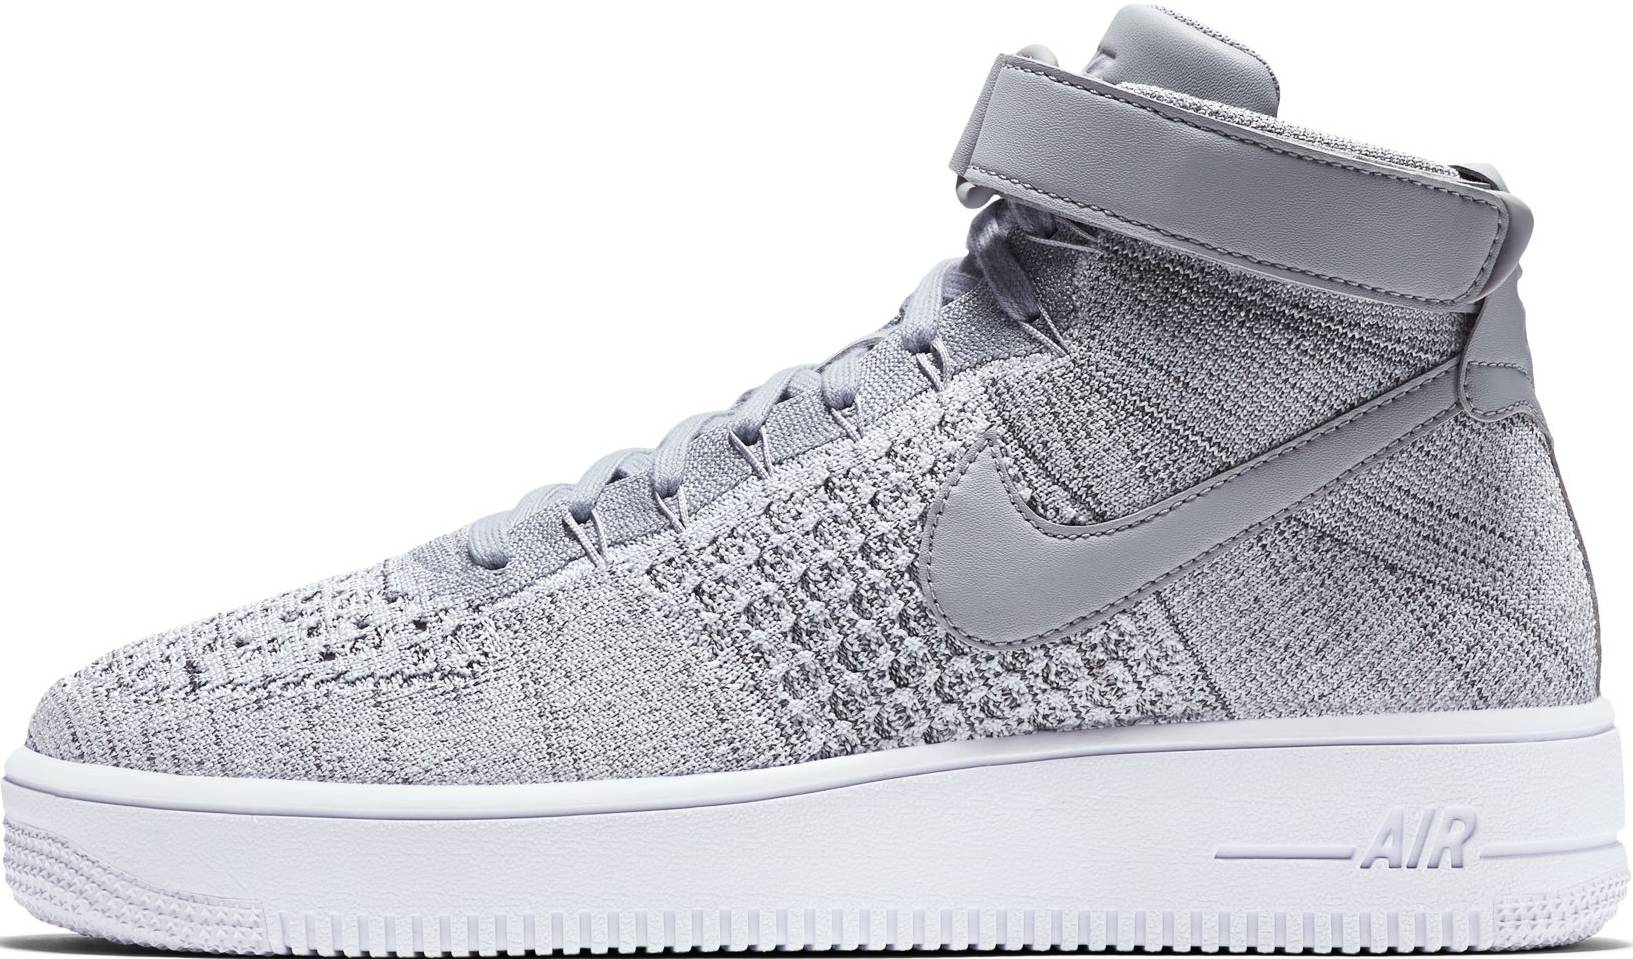 14 Reasons to/NOT to Buy Nike Air Force 1 Ultra Flyknit Mid (Oct